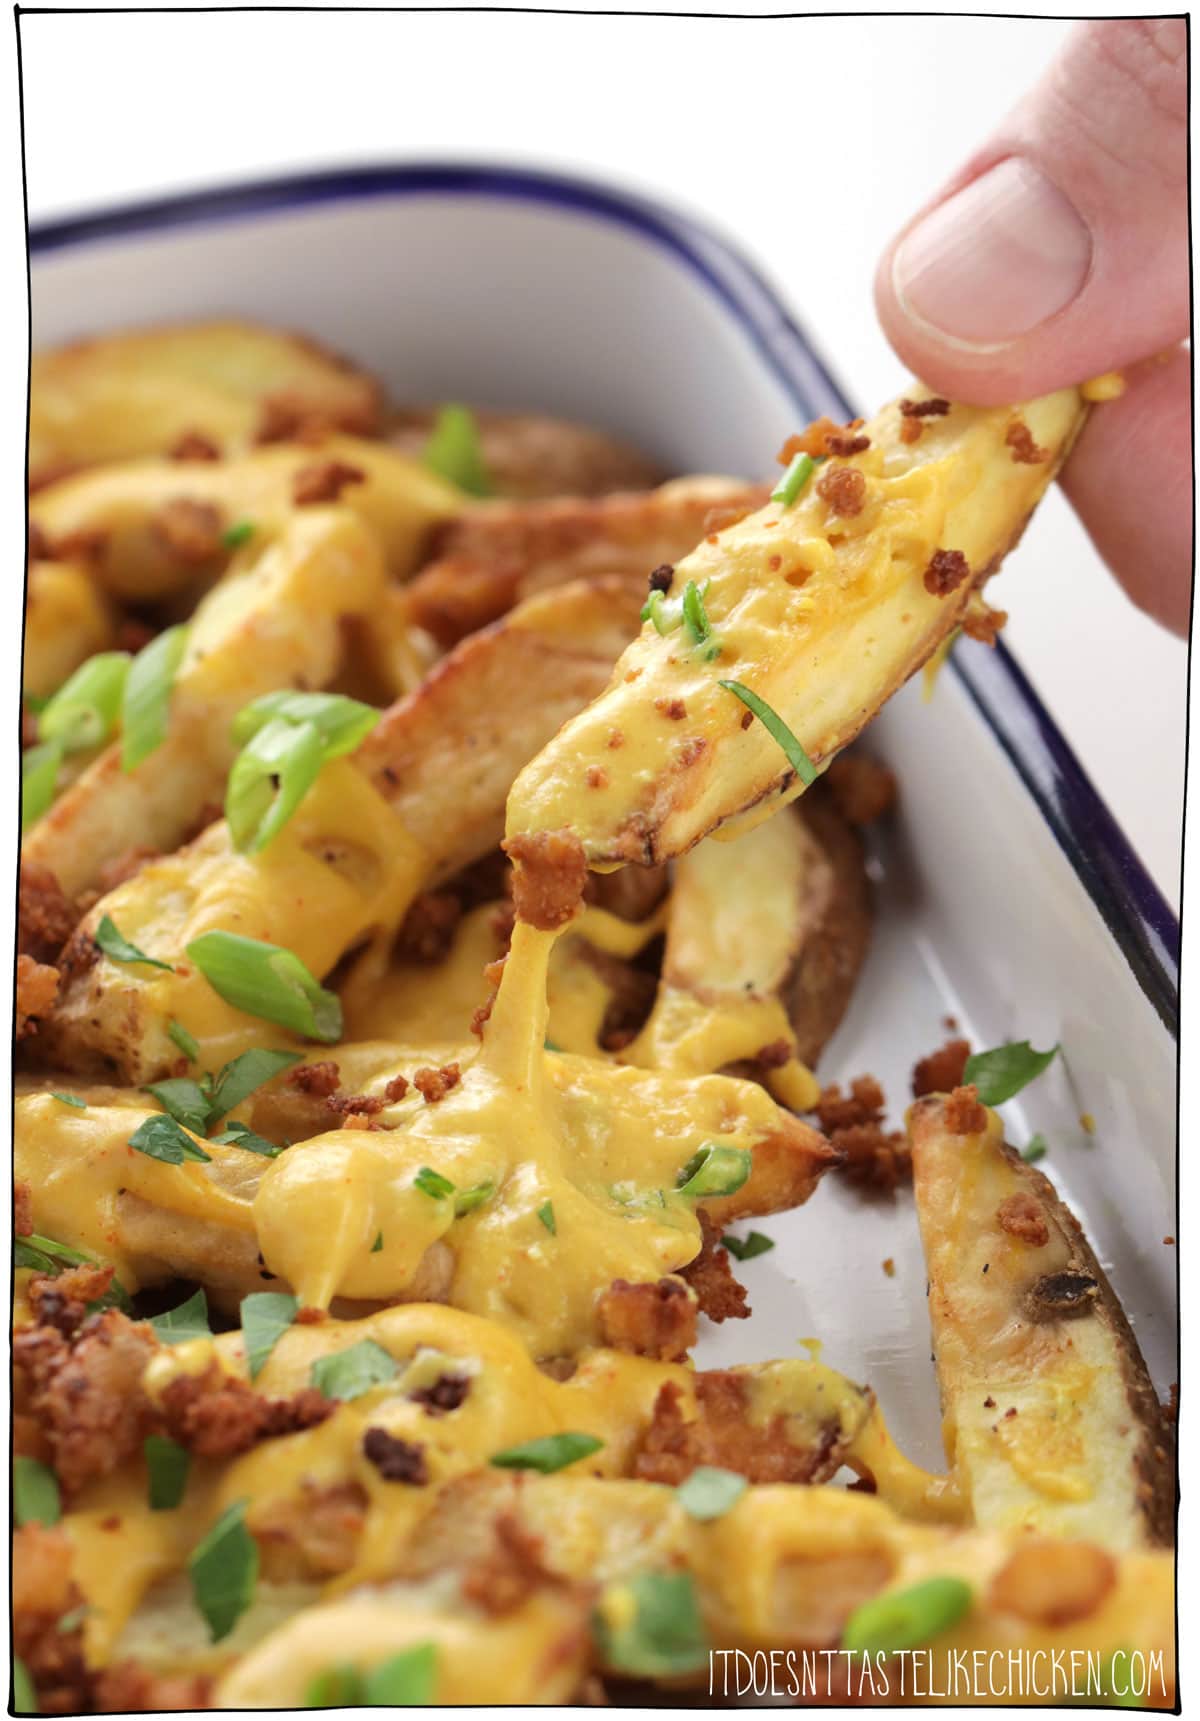 Easy Vegan Cheese Fries! Crispy french fries with homemade stretchy melty vegan nacho cheese, and tofu bacon bits. The perfect comfort food for movie night or game night. Surprisingly healthy and can even be made oil-free! #itdoesnttastelikechicken #veganrecipes #vegan